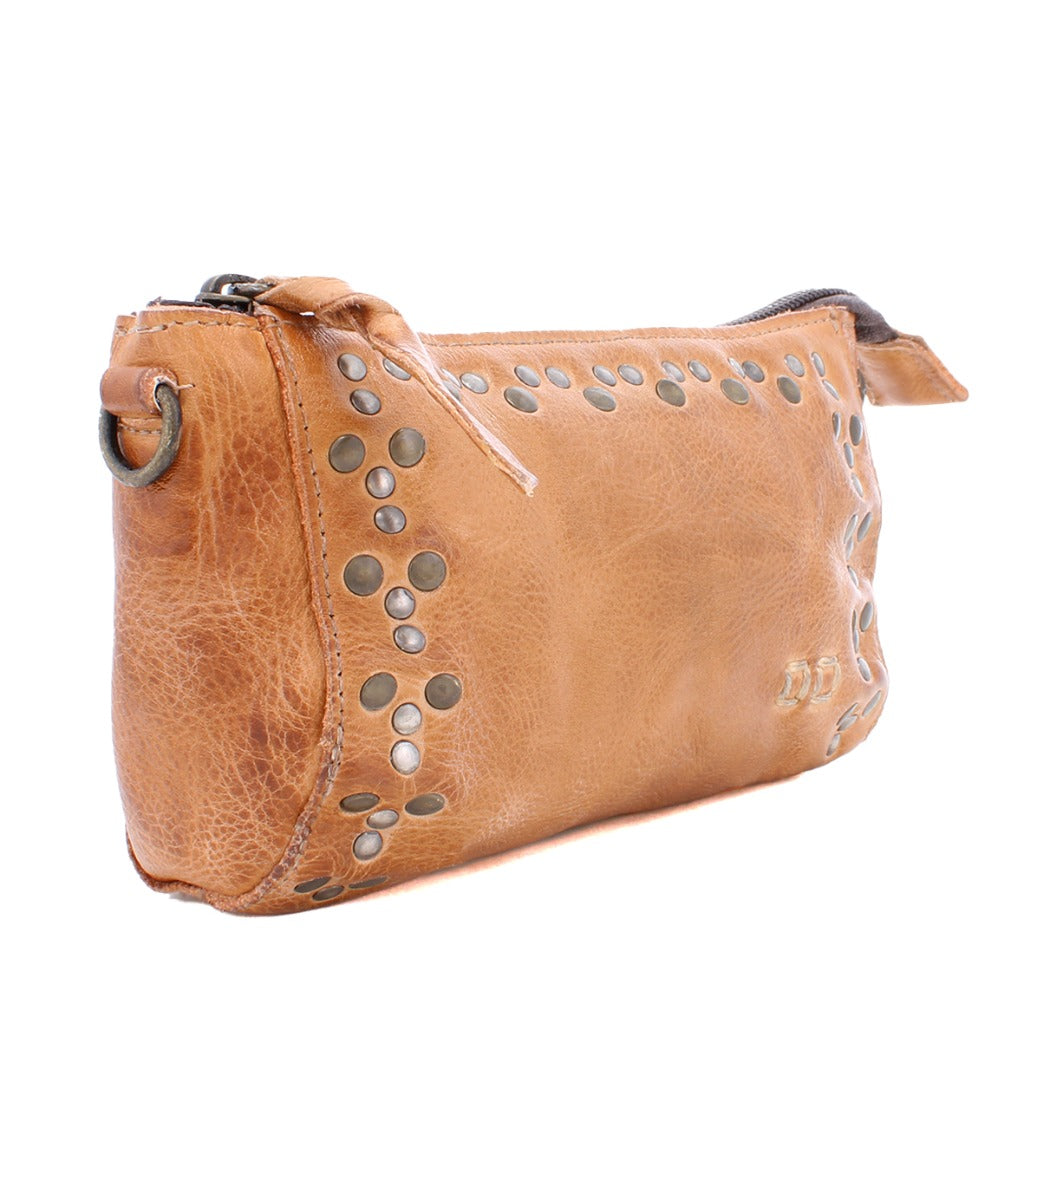 An Encase tan leather purse with studded details by Bed Stu.